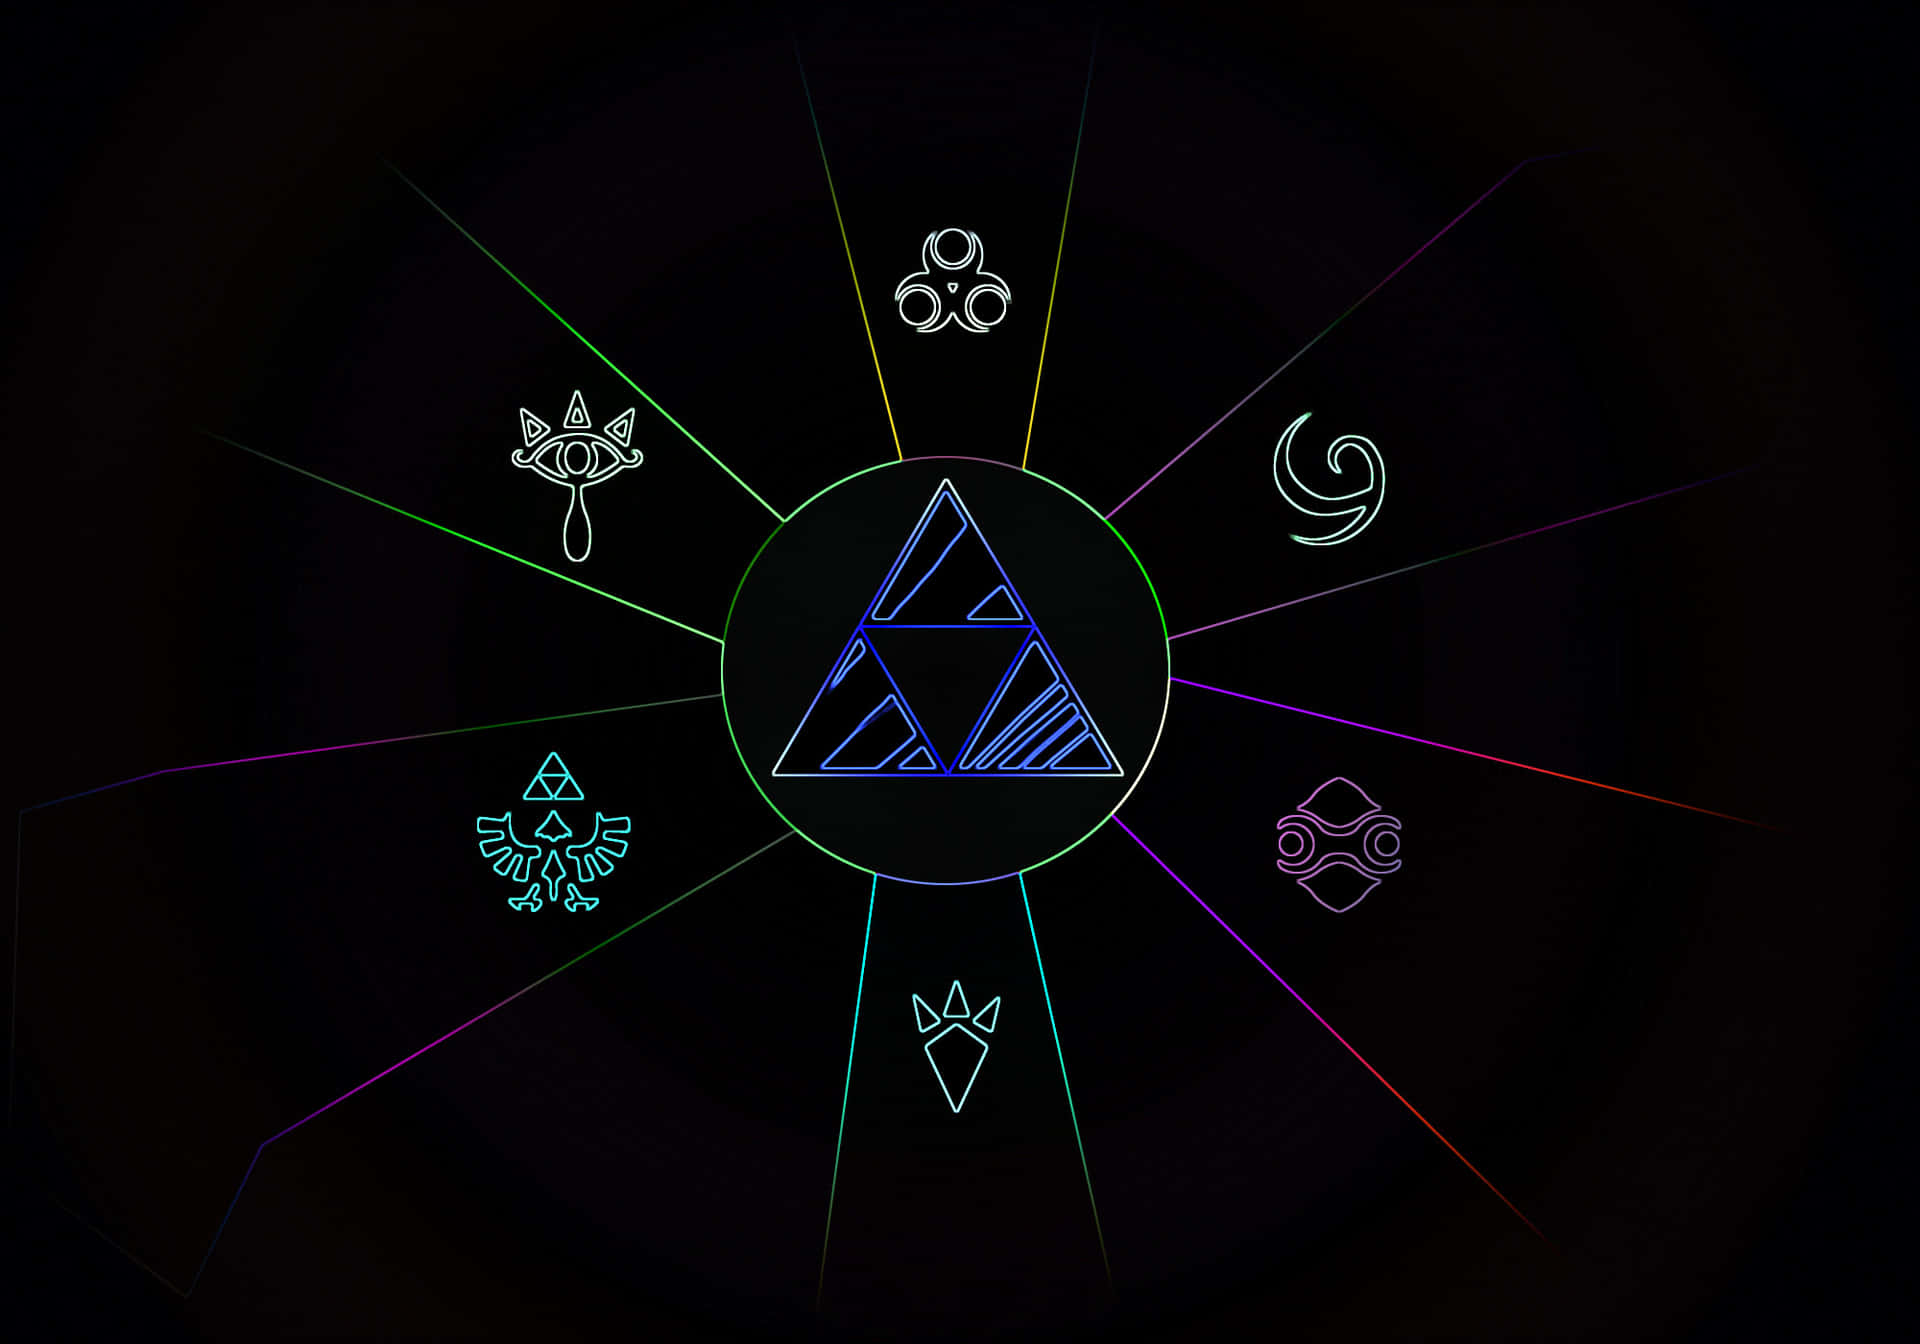 The Iconic Triforce Of Nintendo's Celebrated The Legend Of Zelda Series